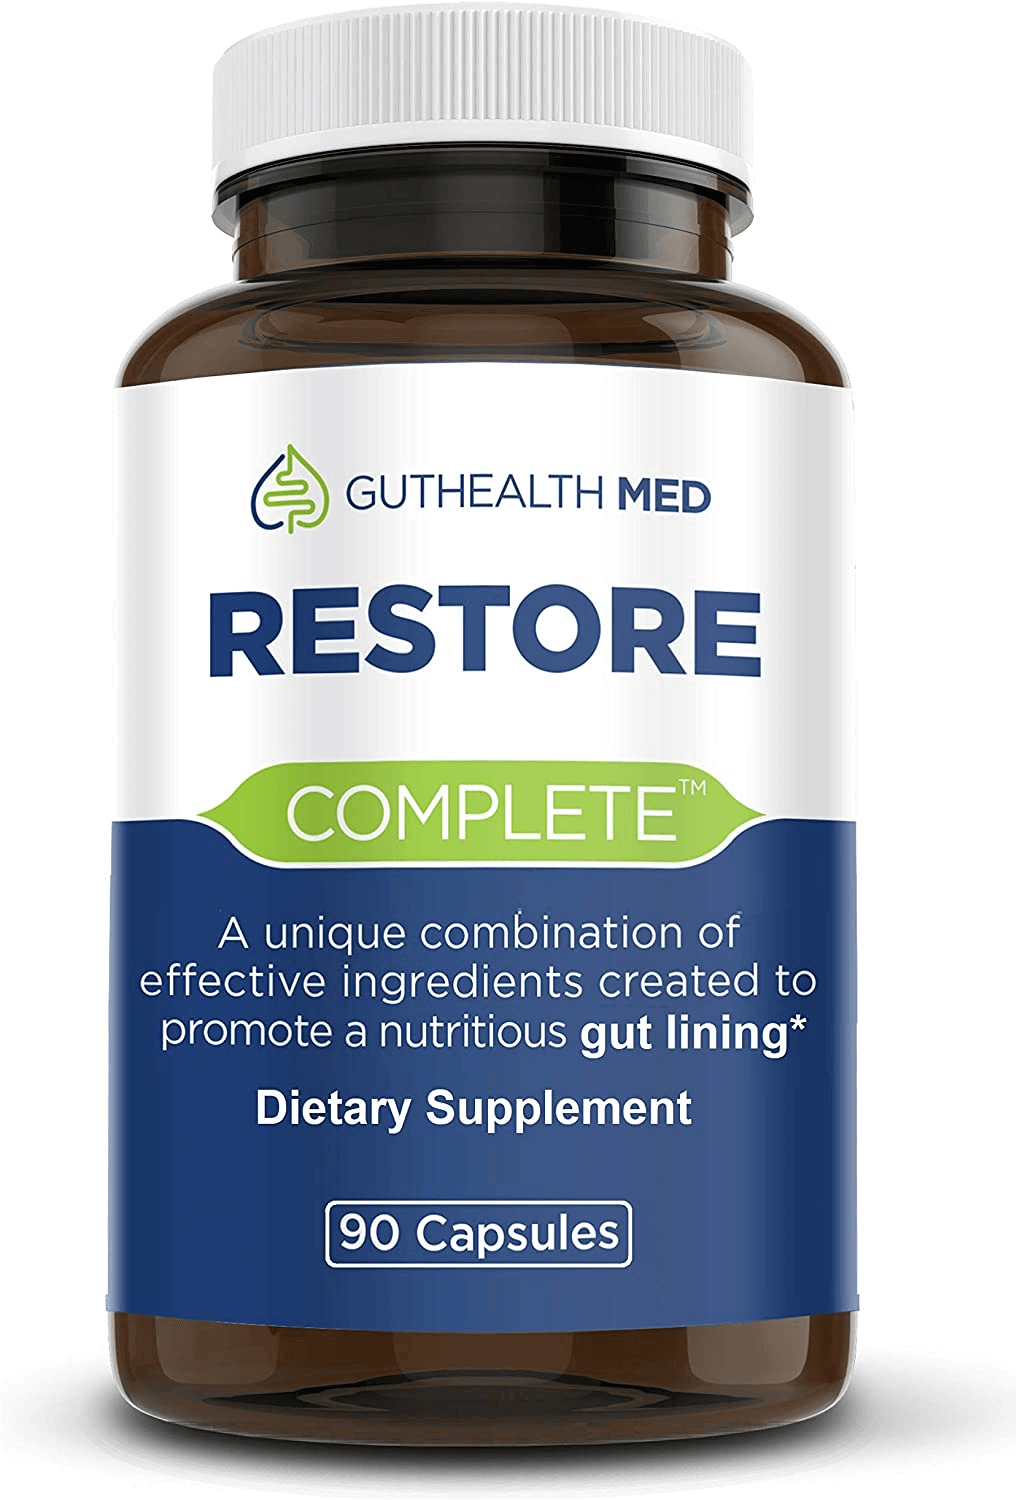 Guthealth MED Totai Complete Full Restore - Complete Restore Revitalize - Maximum Leaky Gut Relief | Provides Total Full Restore for the Gut Lining Support Blend 90 Capsules - vitamenstore.com